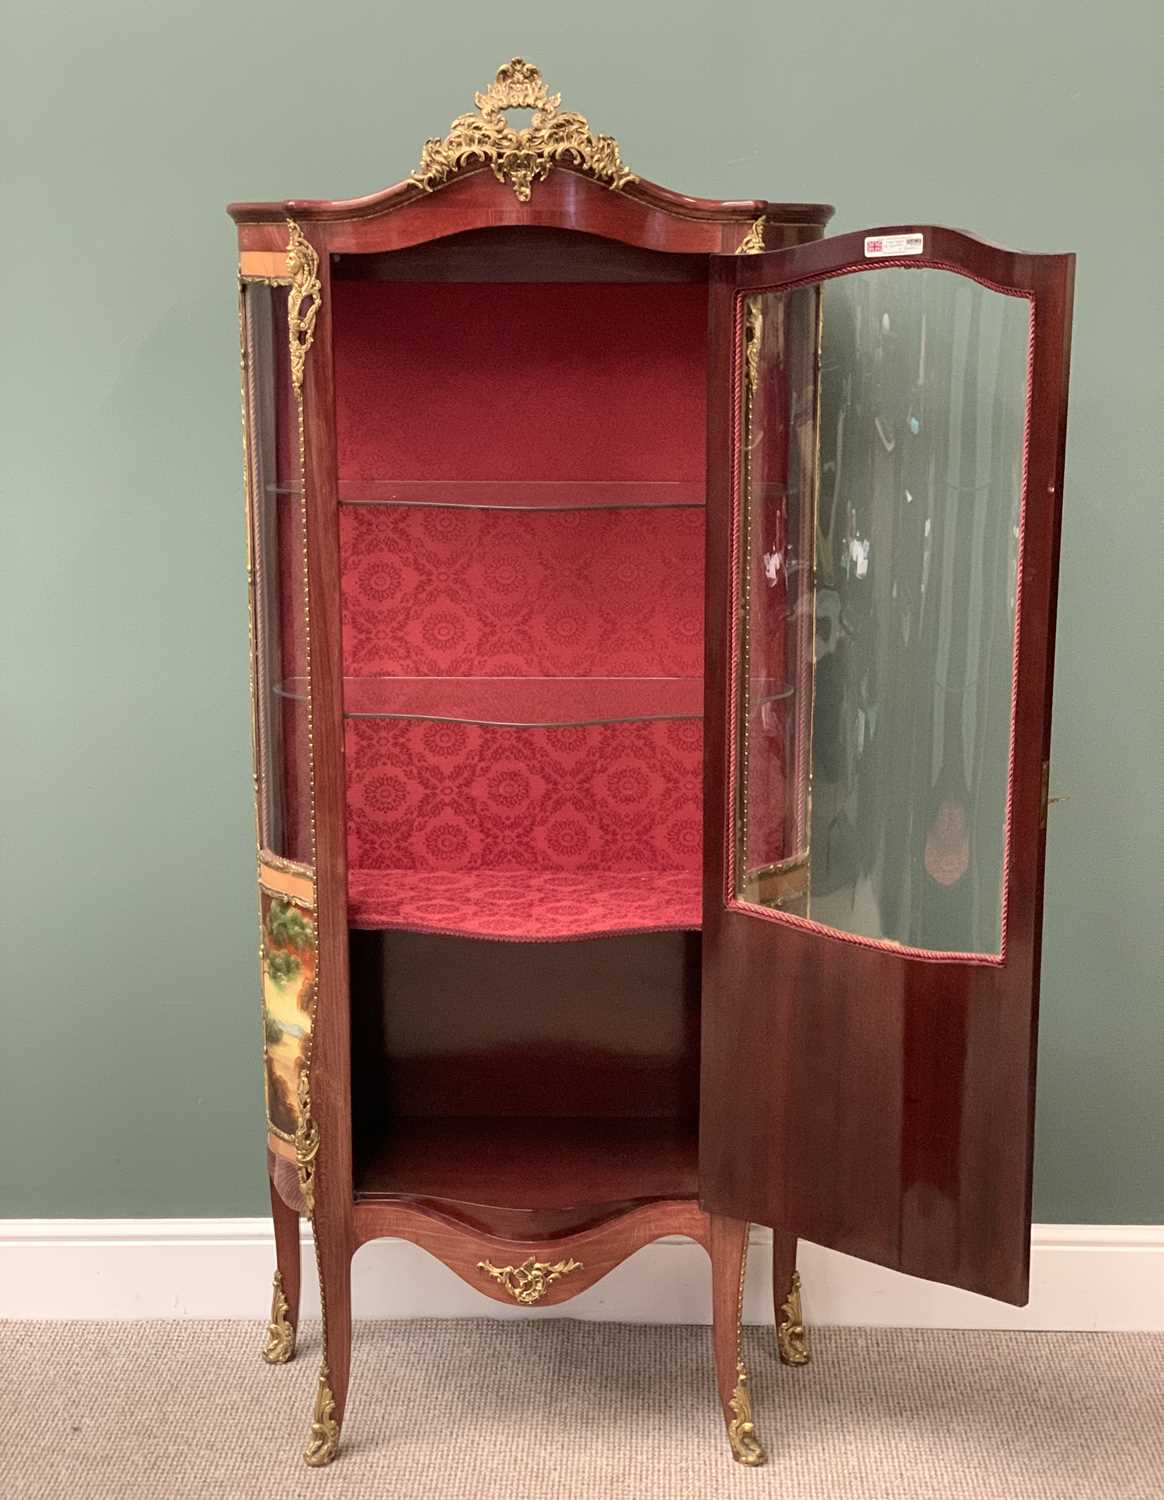 ANTIQUE FRENCH LOUIS XV STYLE VITRINE by H & L Epstein Ltd, London, having vernis martin type - Image 4 of 7